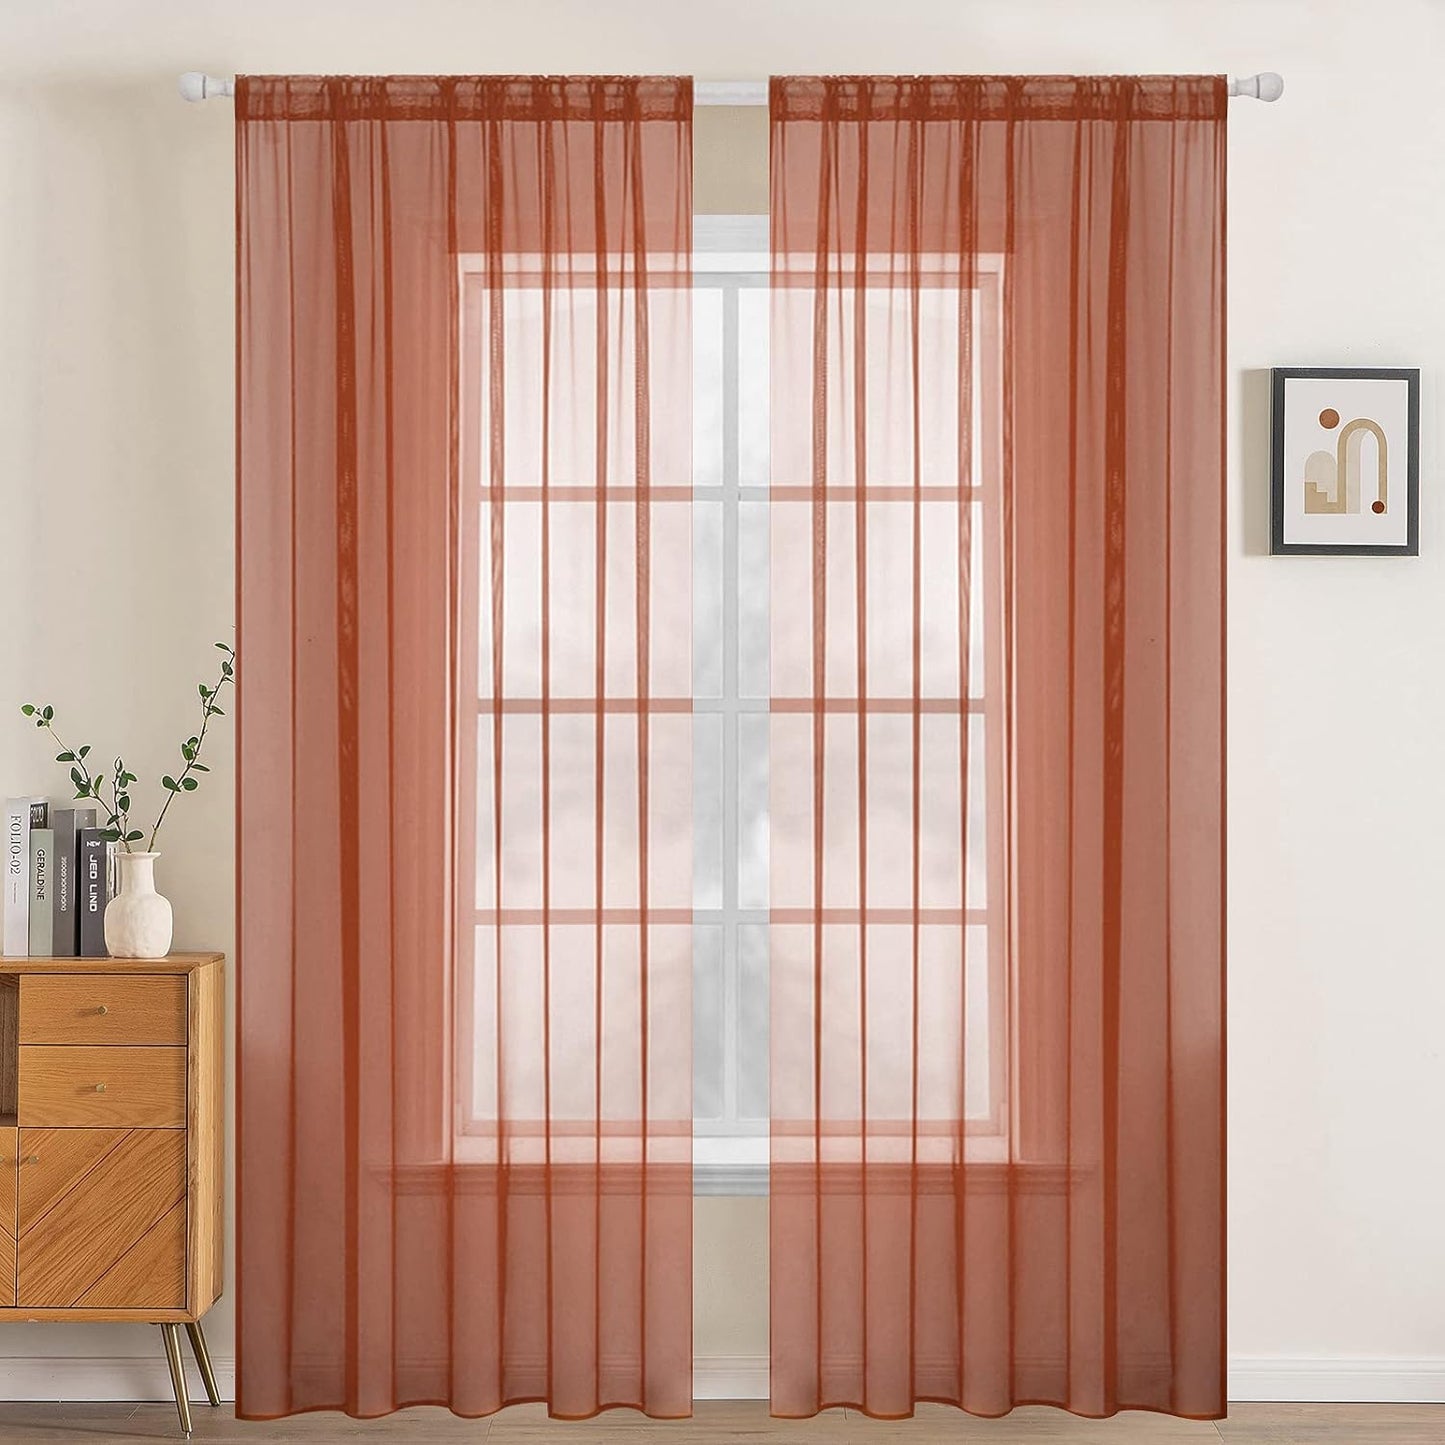 MIULEE White Sheer Curtains 96 Inches Long Window Curtains 2 Panels Solid Color Elegant Window Voile Panels/Drapes/Treatment for Bedroom Living Room (54 X 96 Inches White)  MIULEE Burnt Orange 54''W X 96''L 